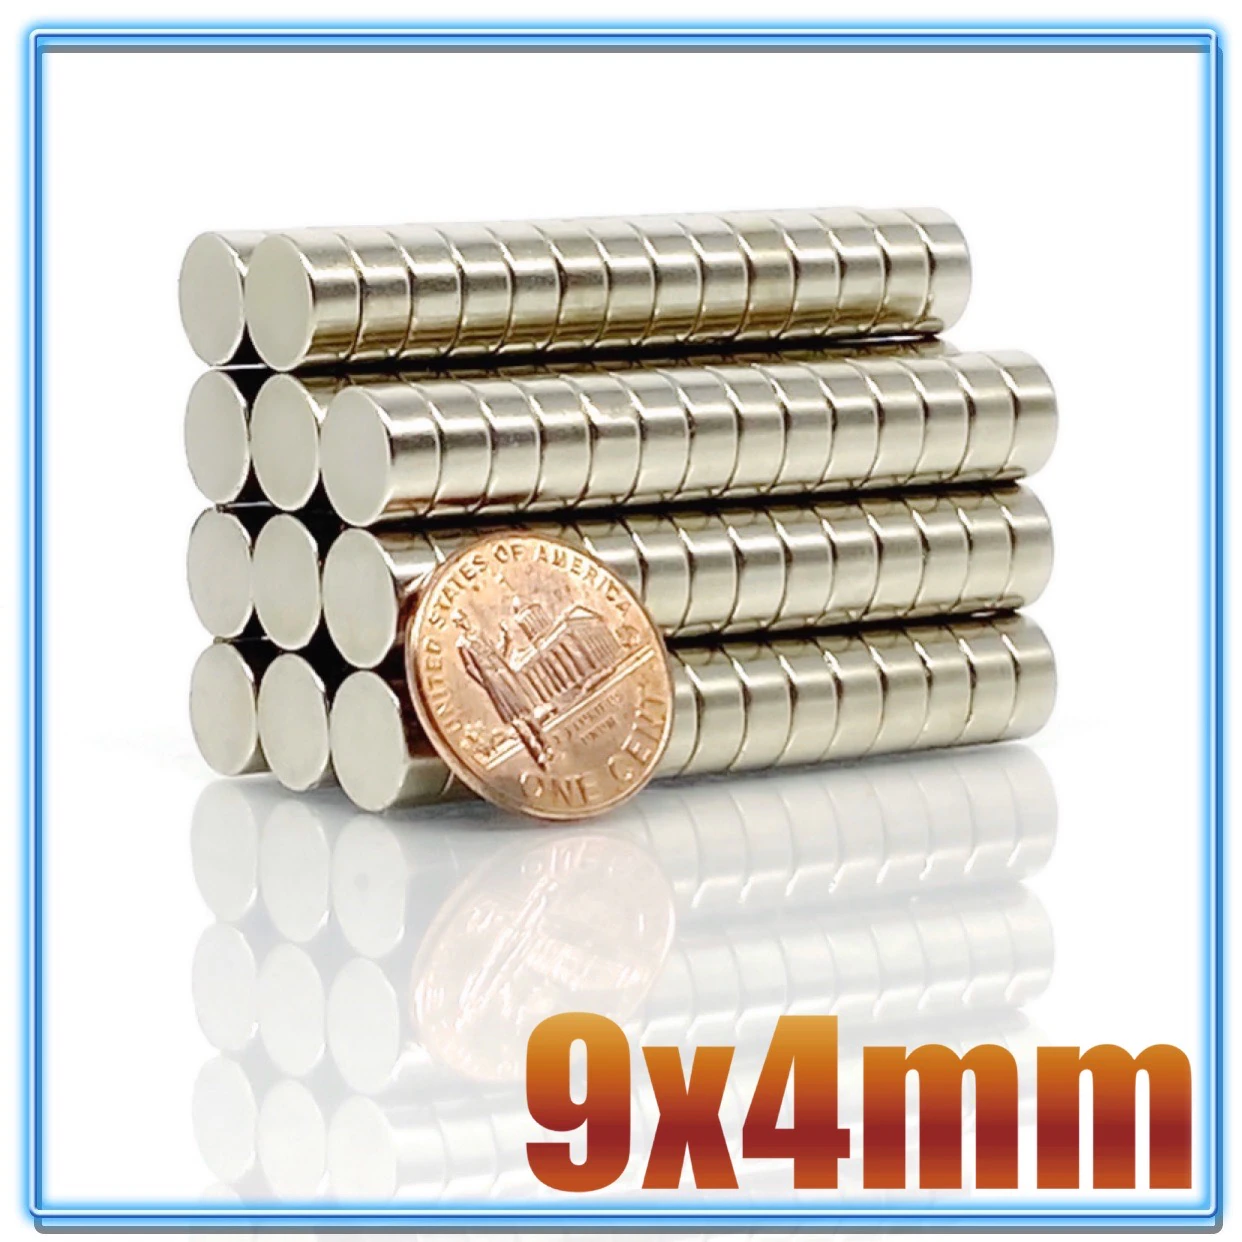 10-1000PCS 9*4 Circular Round Search Rare Earth Neodymium Magnet 9mm x 4mm Permanent magnet Strong 9×4 For Speaker